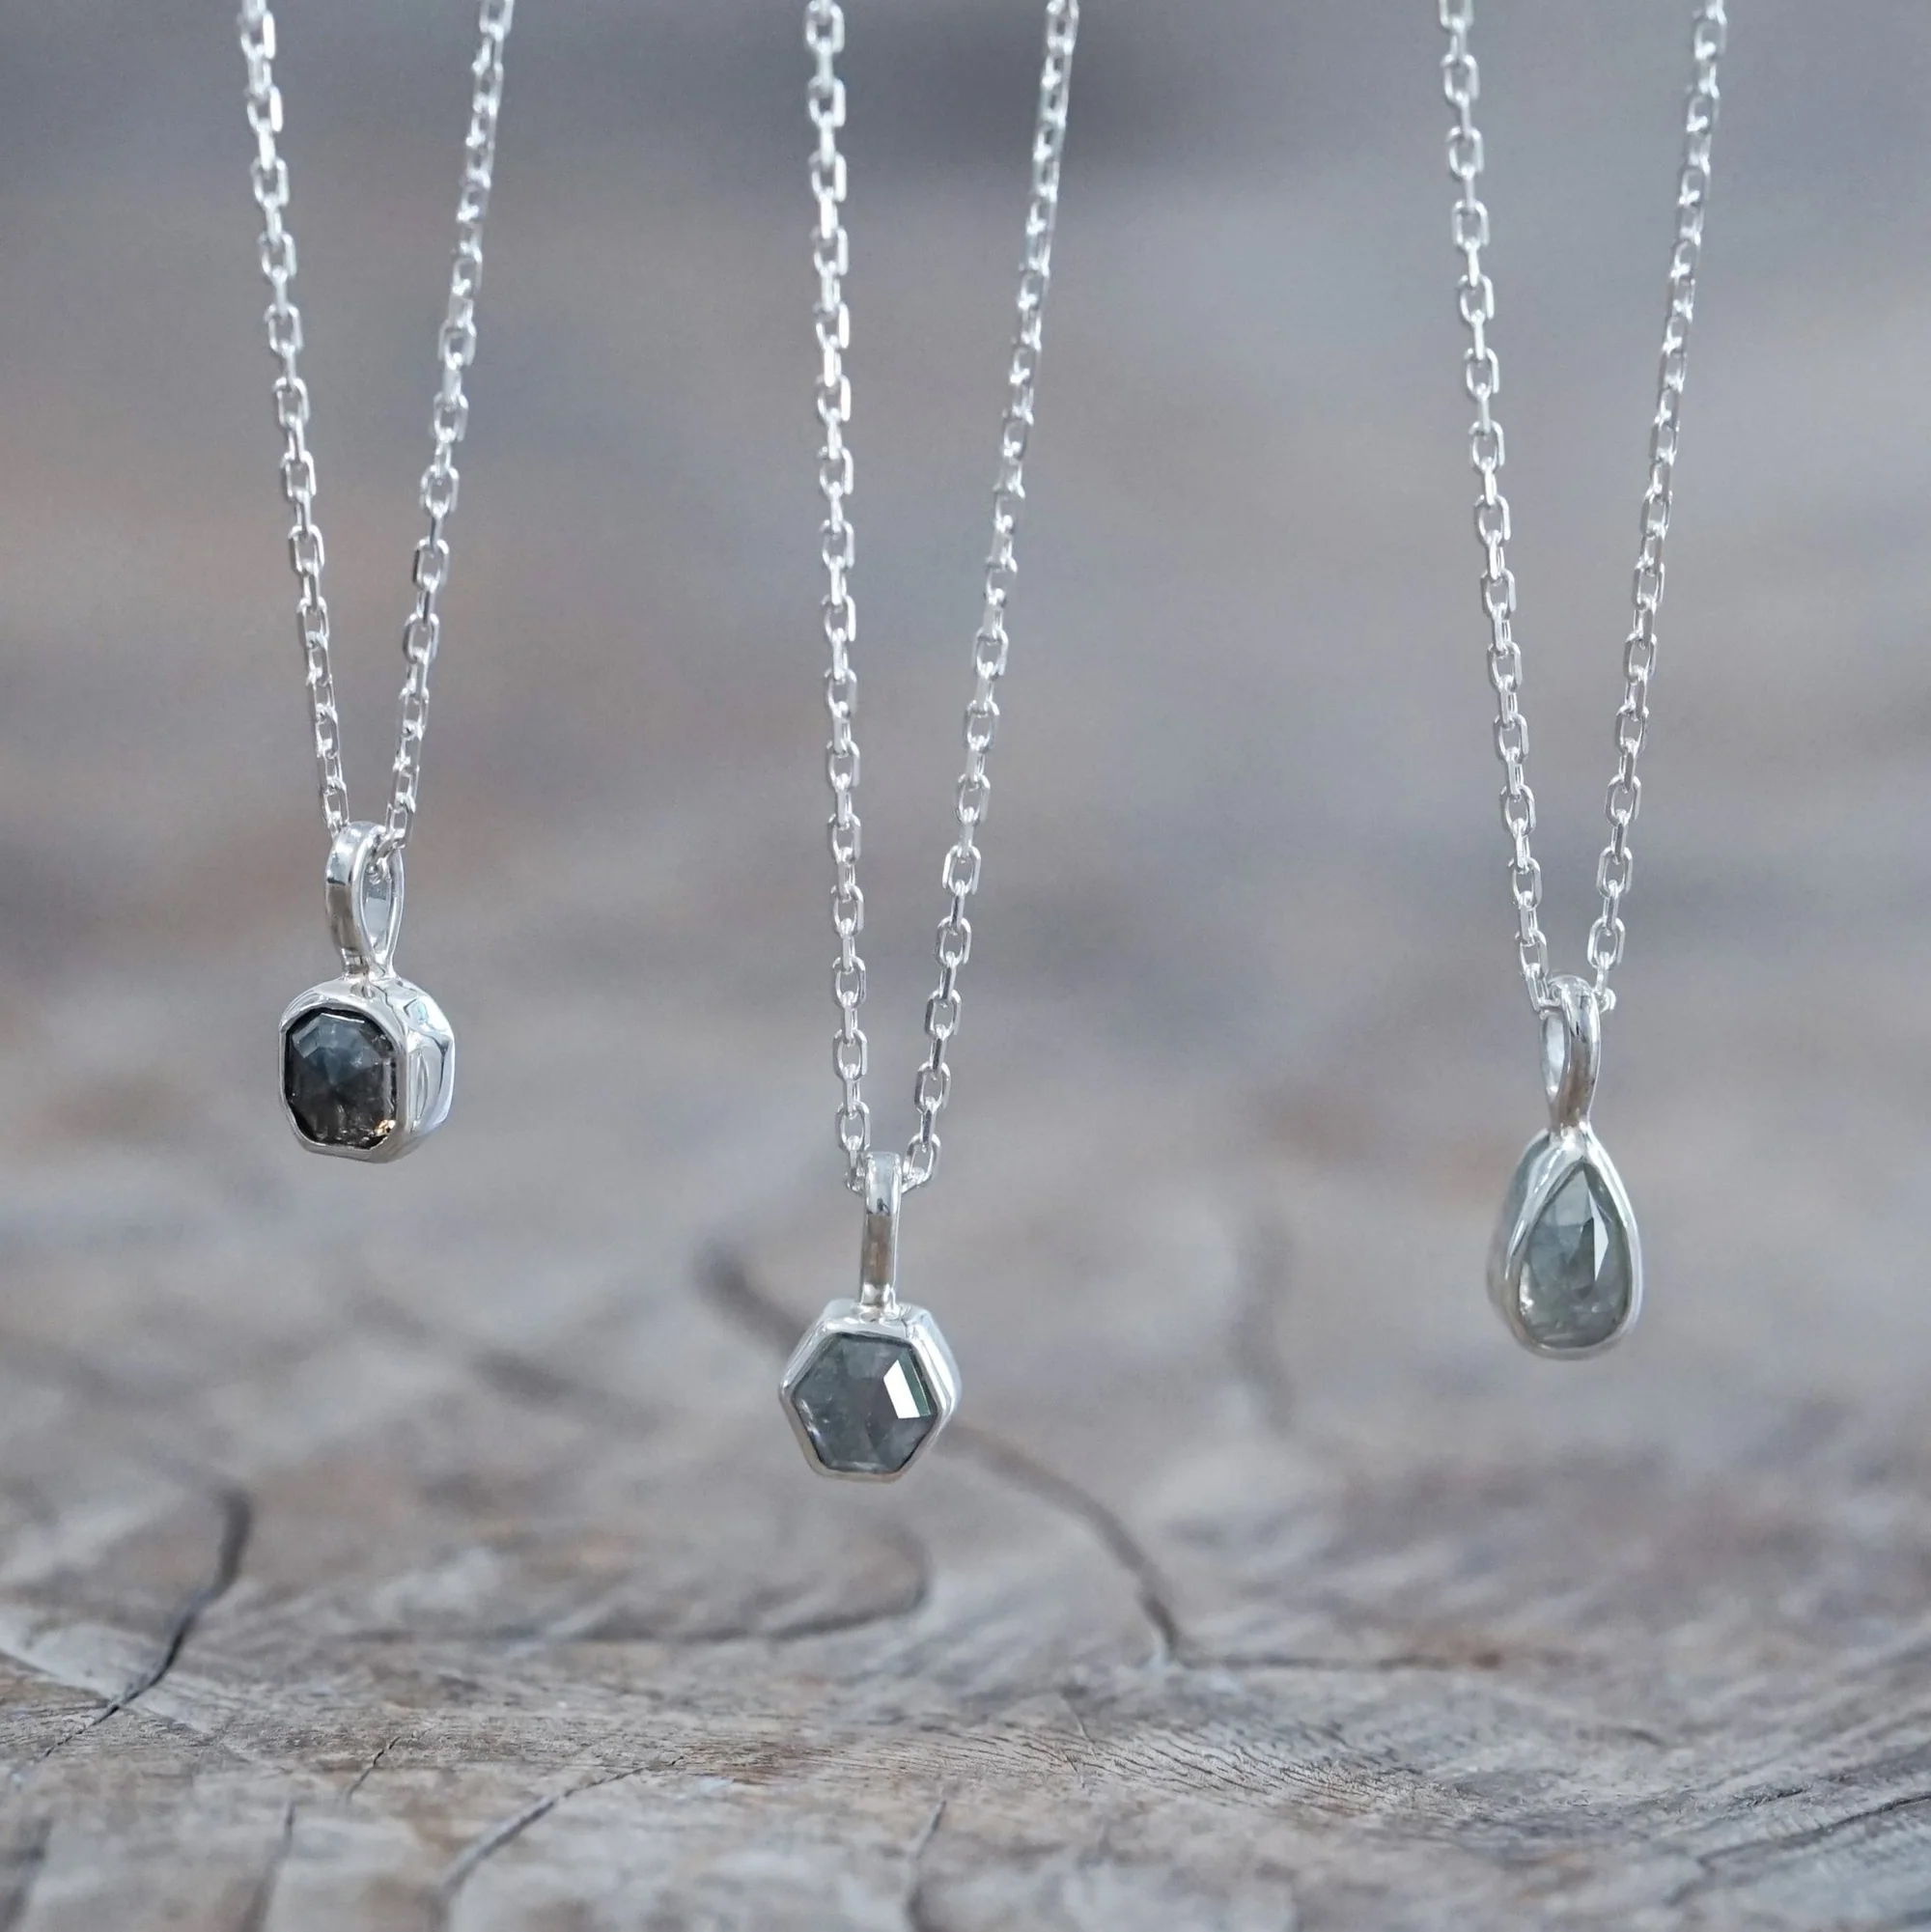 Three drop necklaces from Gardens of the Sun